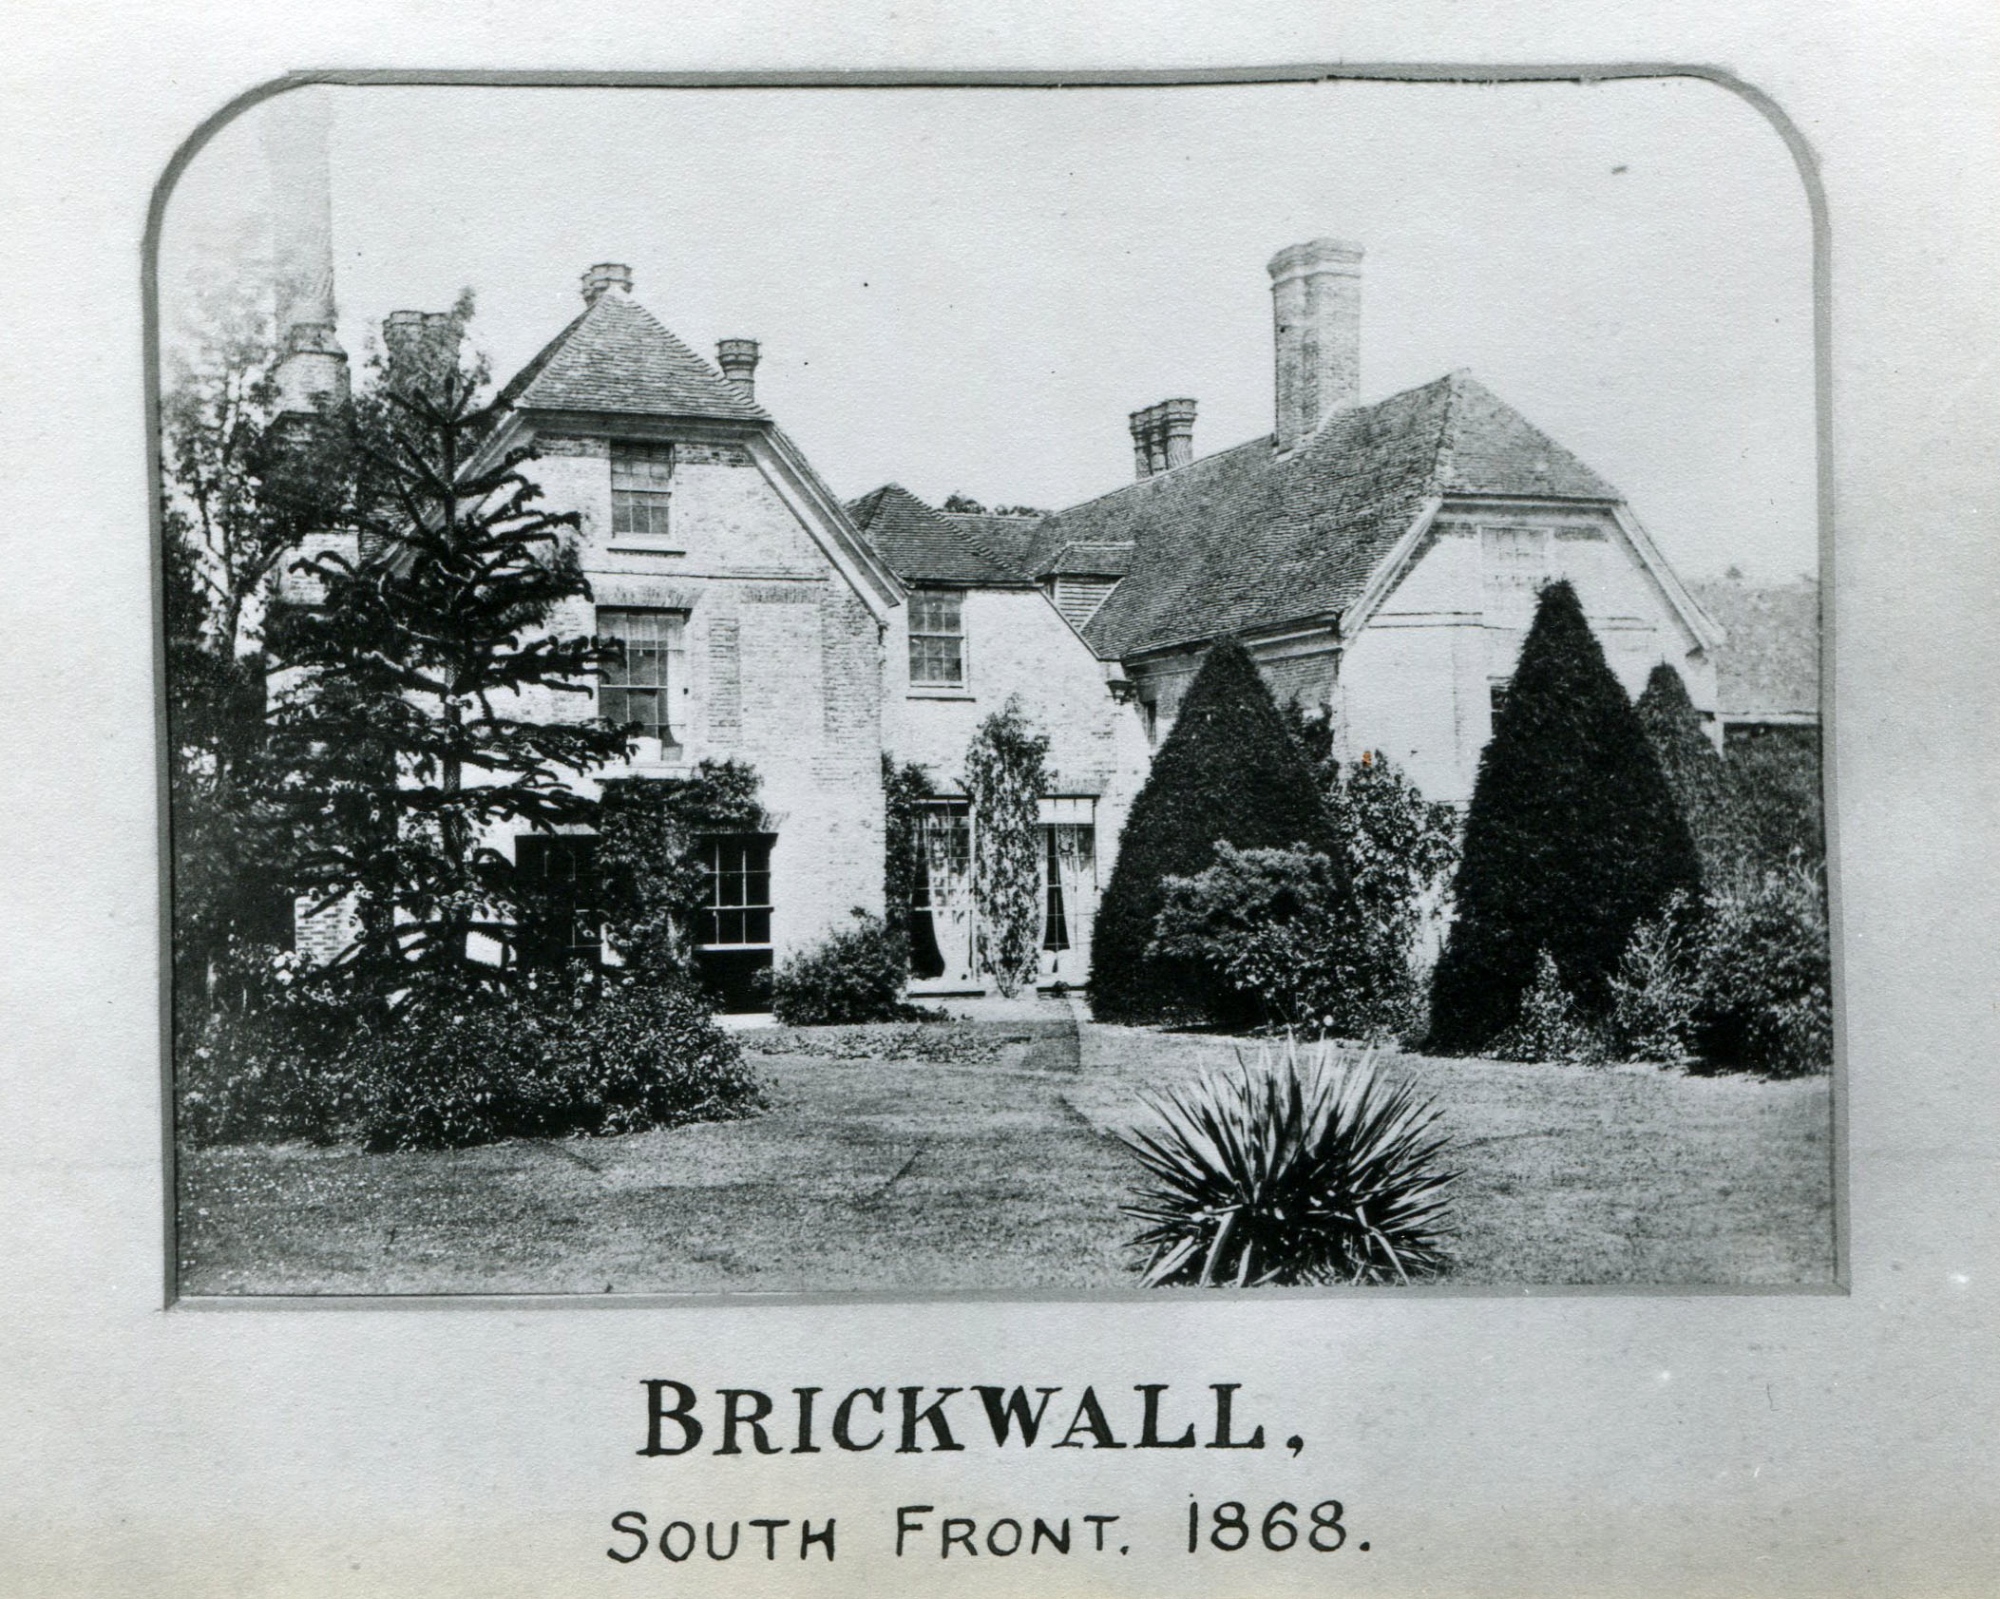 Frewen was called Brickwall House, it is a school for dyslexic children